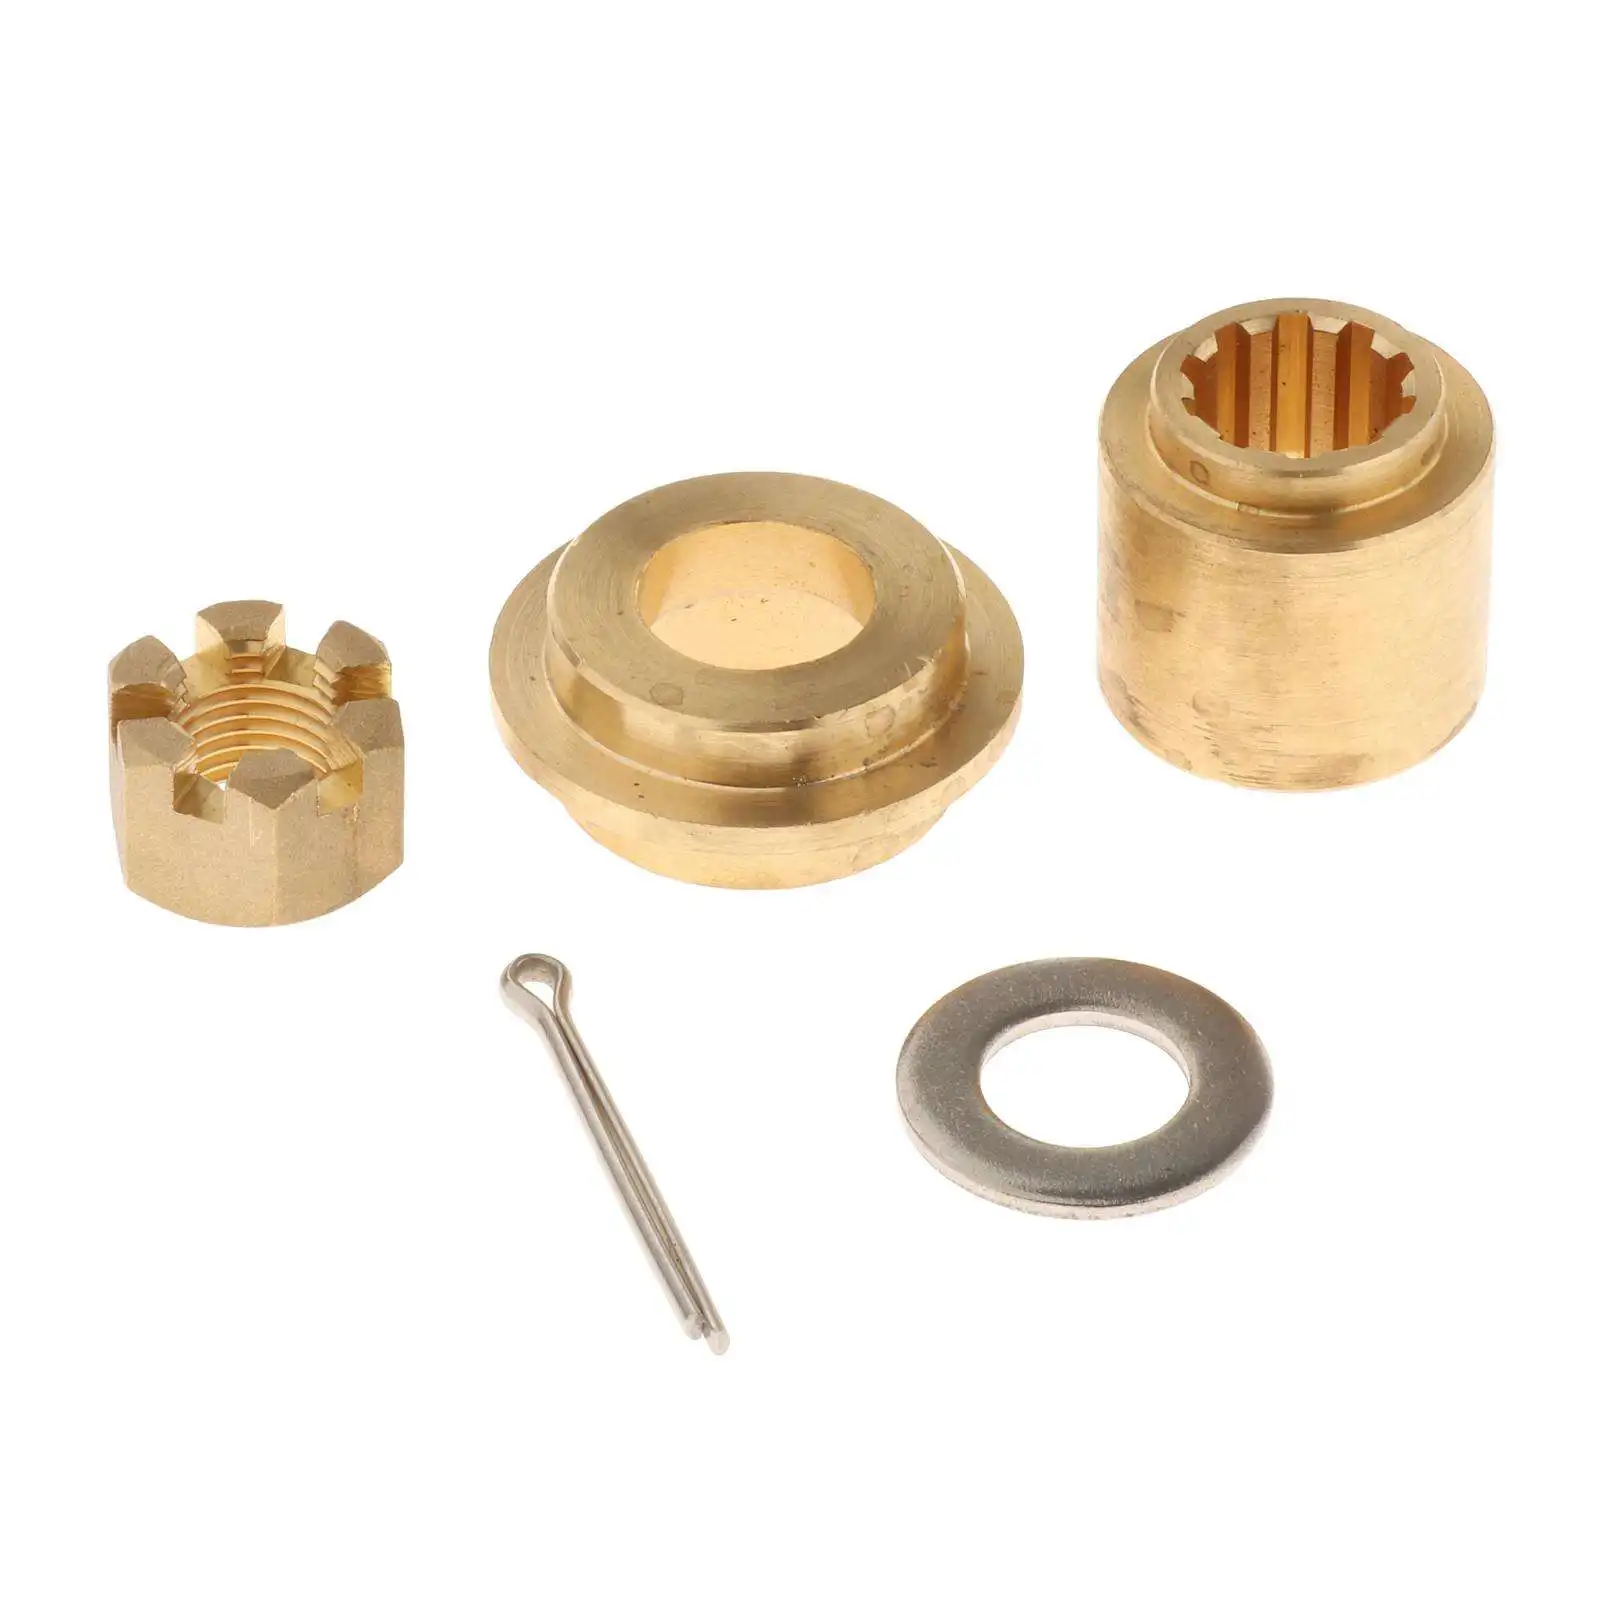 Propeller Installation Hardware Kit Fit for Yamaha Thrust Washer Spacer Nut 6L2-45987-01 689-45997-00 Boat Parts